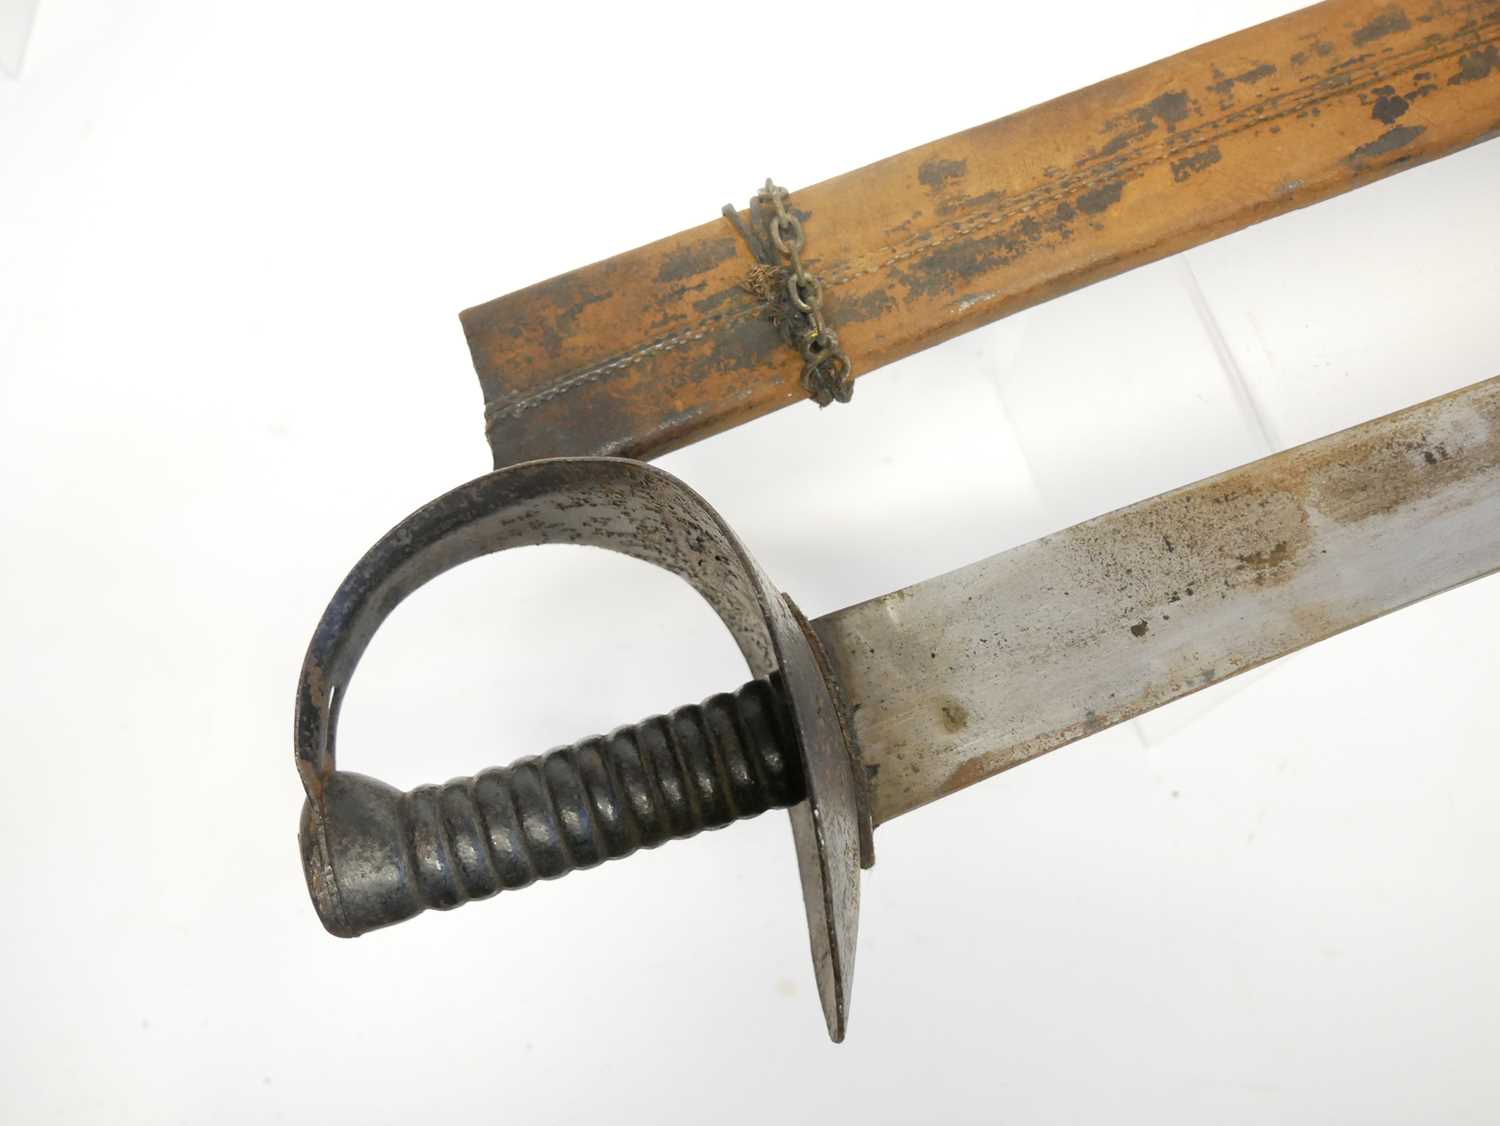 Wilkinson lead cutter No.3 sword, for strength training and feats of swordsmanship, 32.5-inch - Image 10 of 11